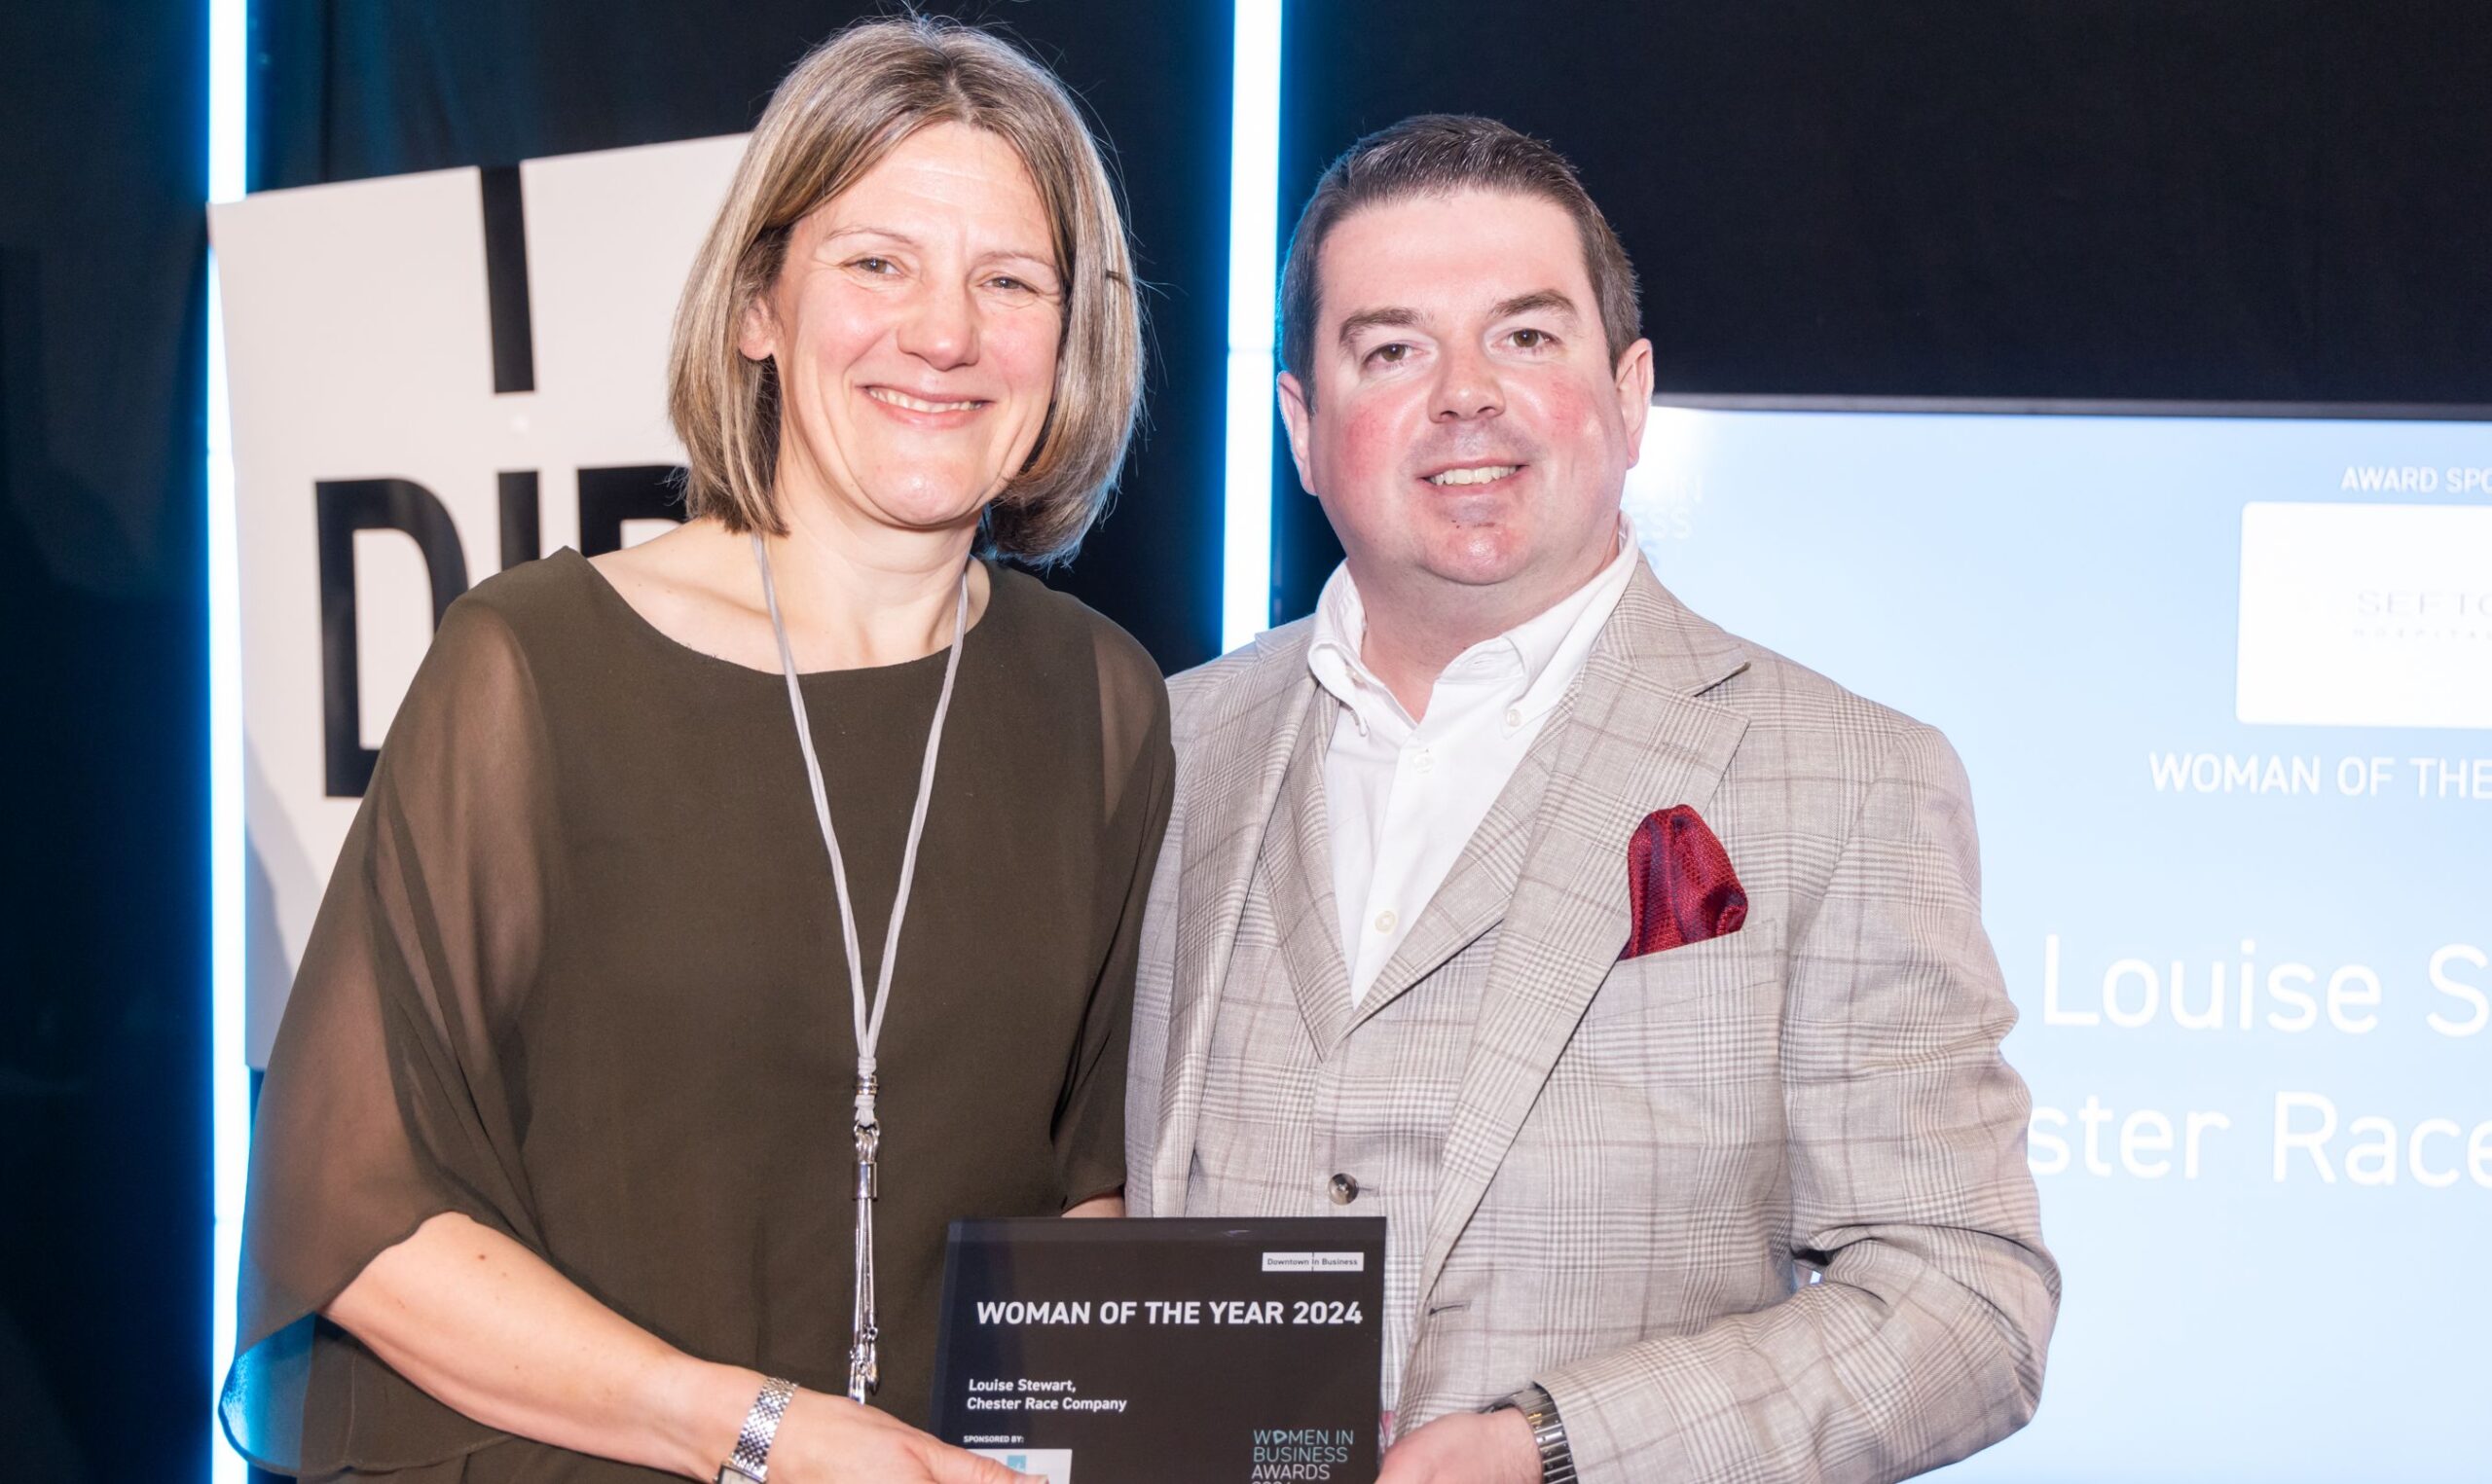 Chester Race Company CEO Louise Stewart named Woman of the Year at Women In Business Awards thumbnail image